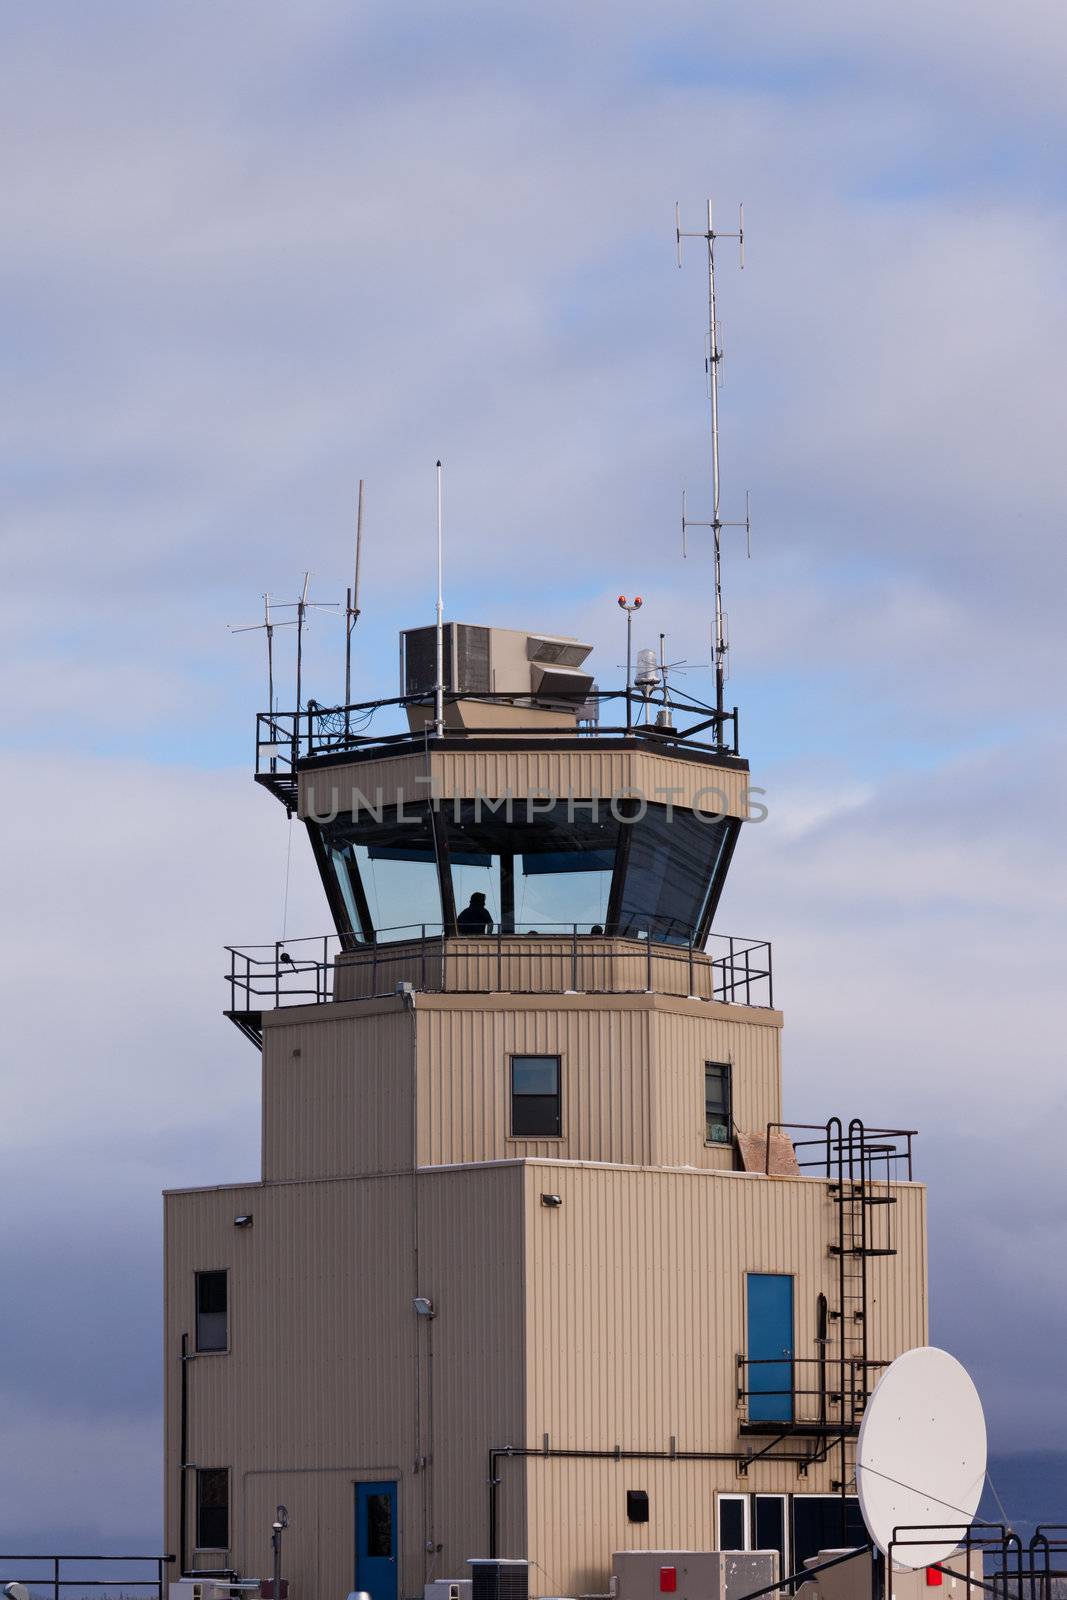 Small airport air traffic control tower with silhouette of man behind huge glass windows monitoring the airfield